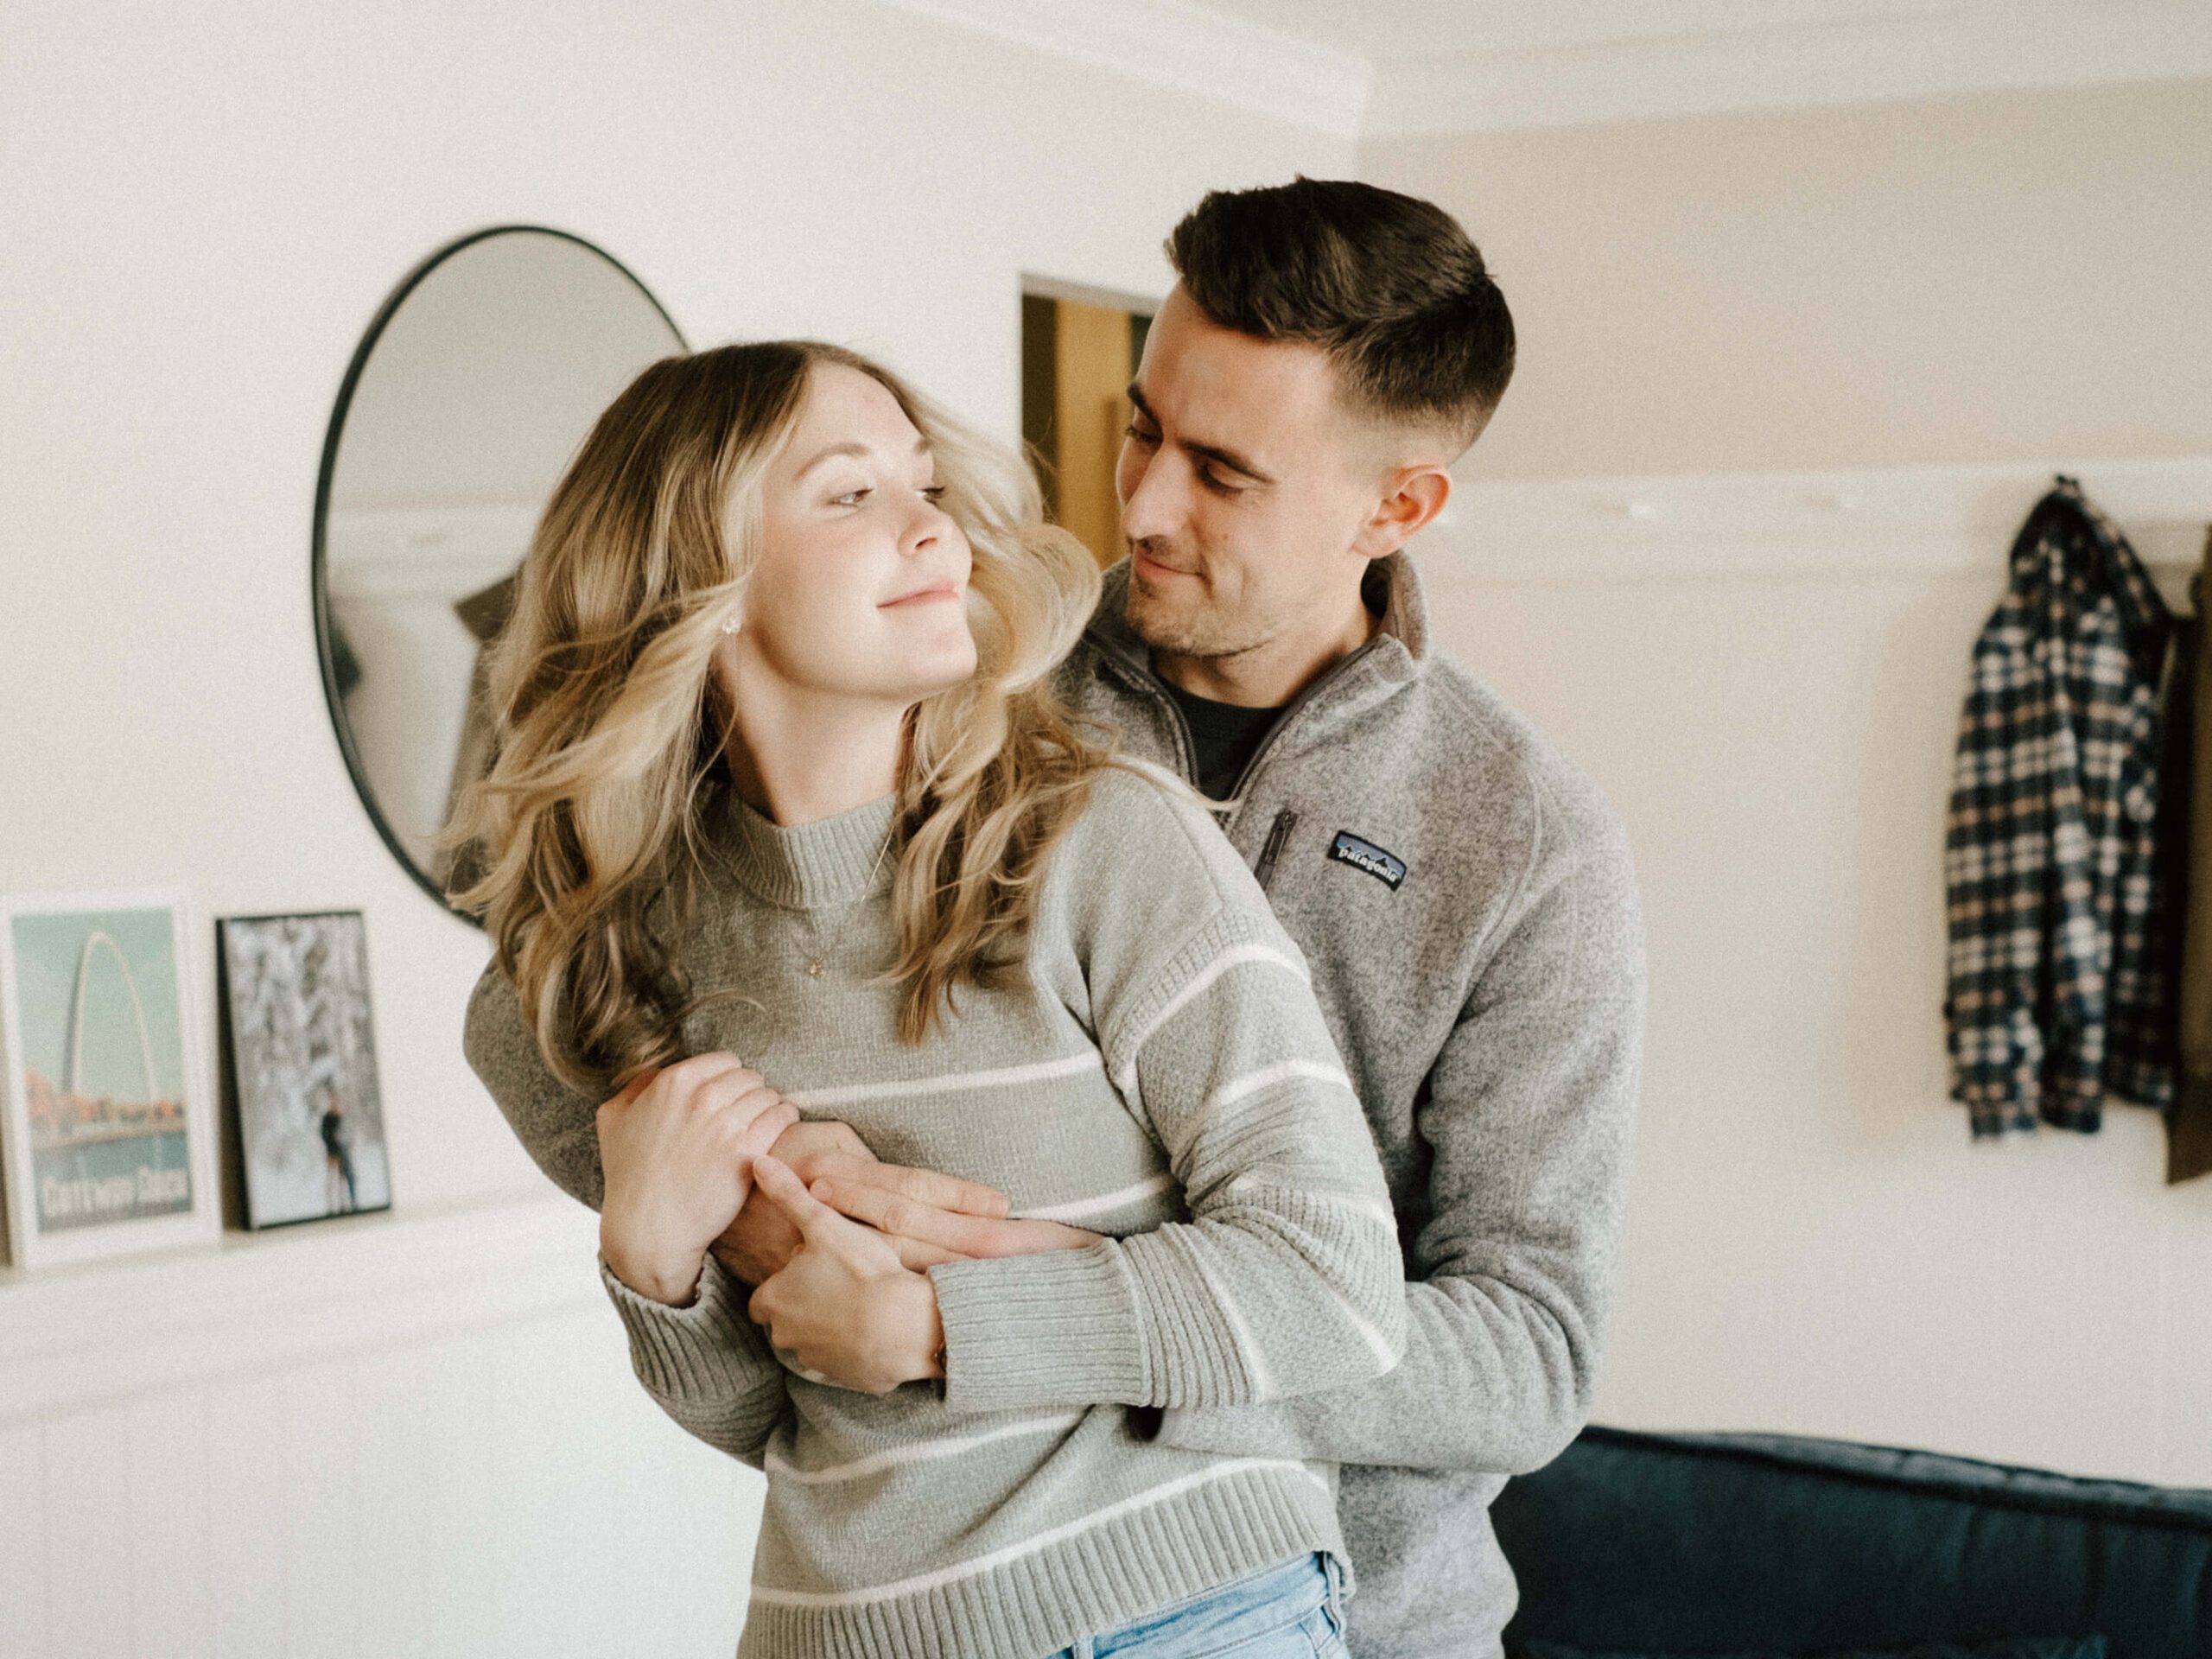 Happy couple dancing at their home in St. Louis, captured with a nostalgic film aesthetic by Stacey Vandas Photography.